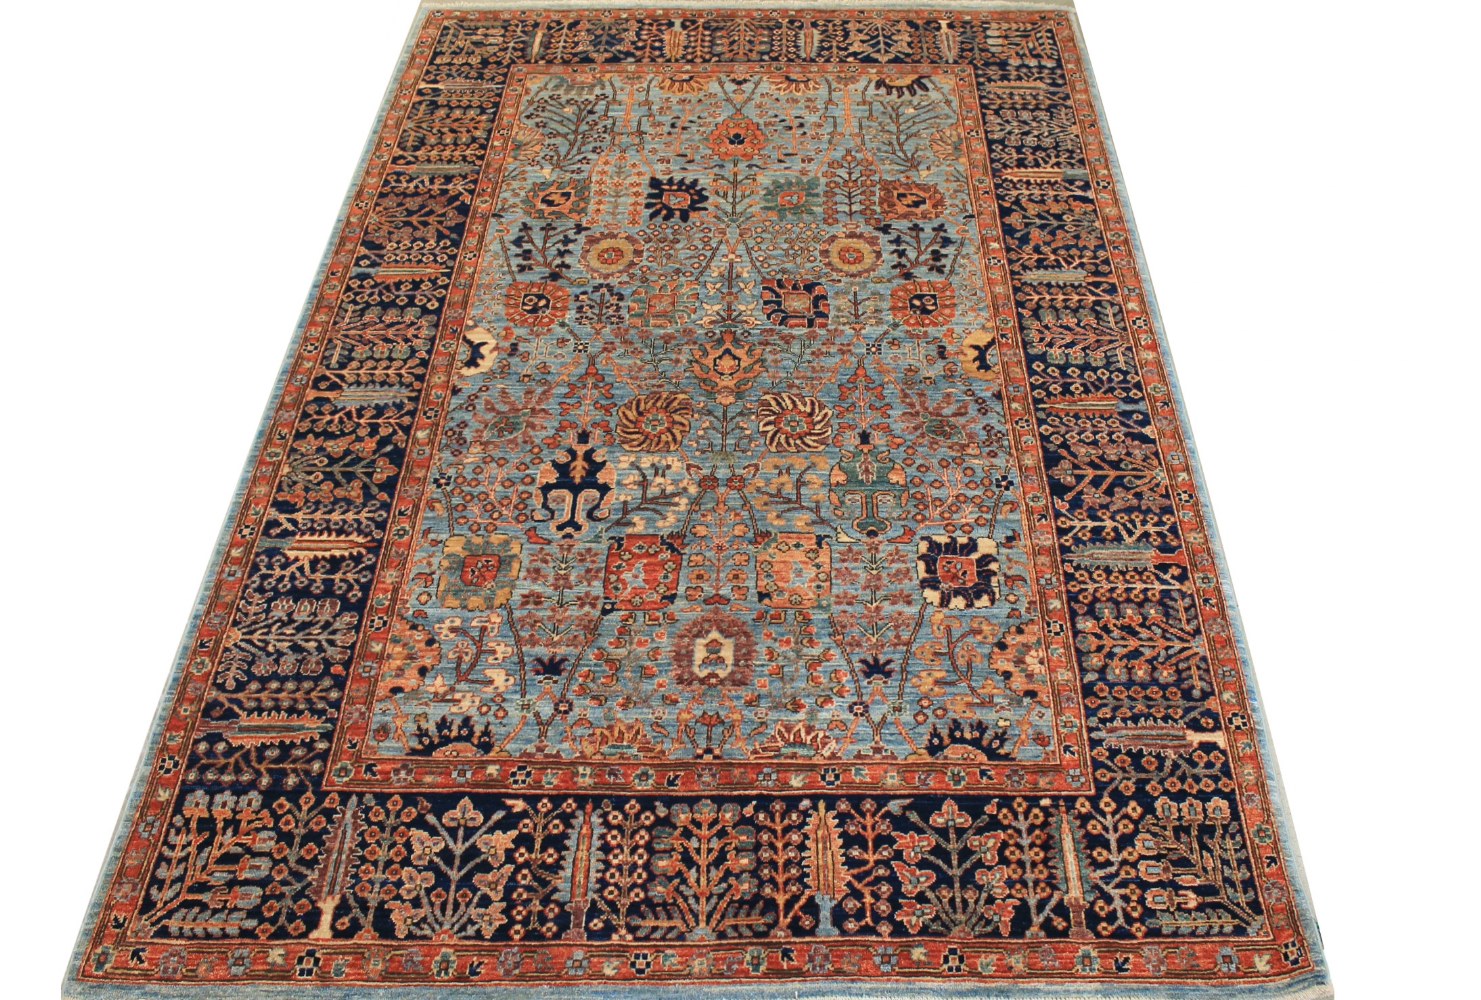 6x9 Aryana & Antique Revivals Hand Knotted Wool Area Rug - MR026336